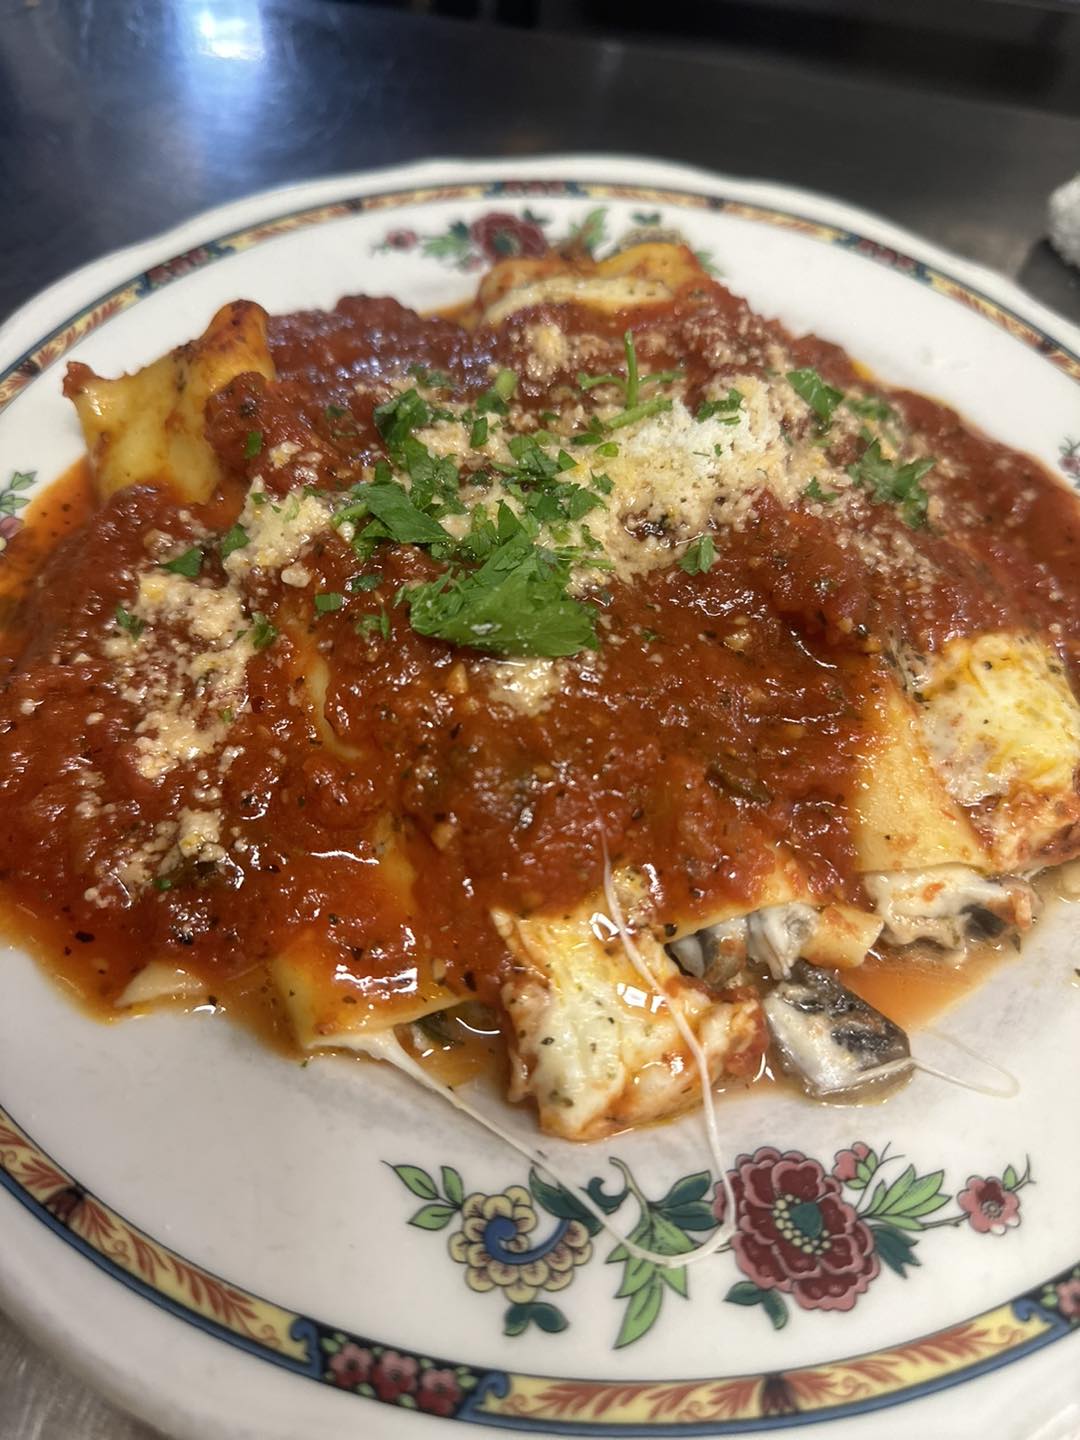 A plate of pasta with red sauce